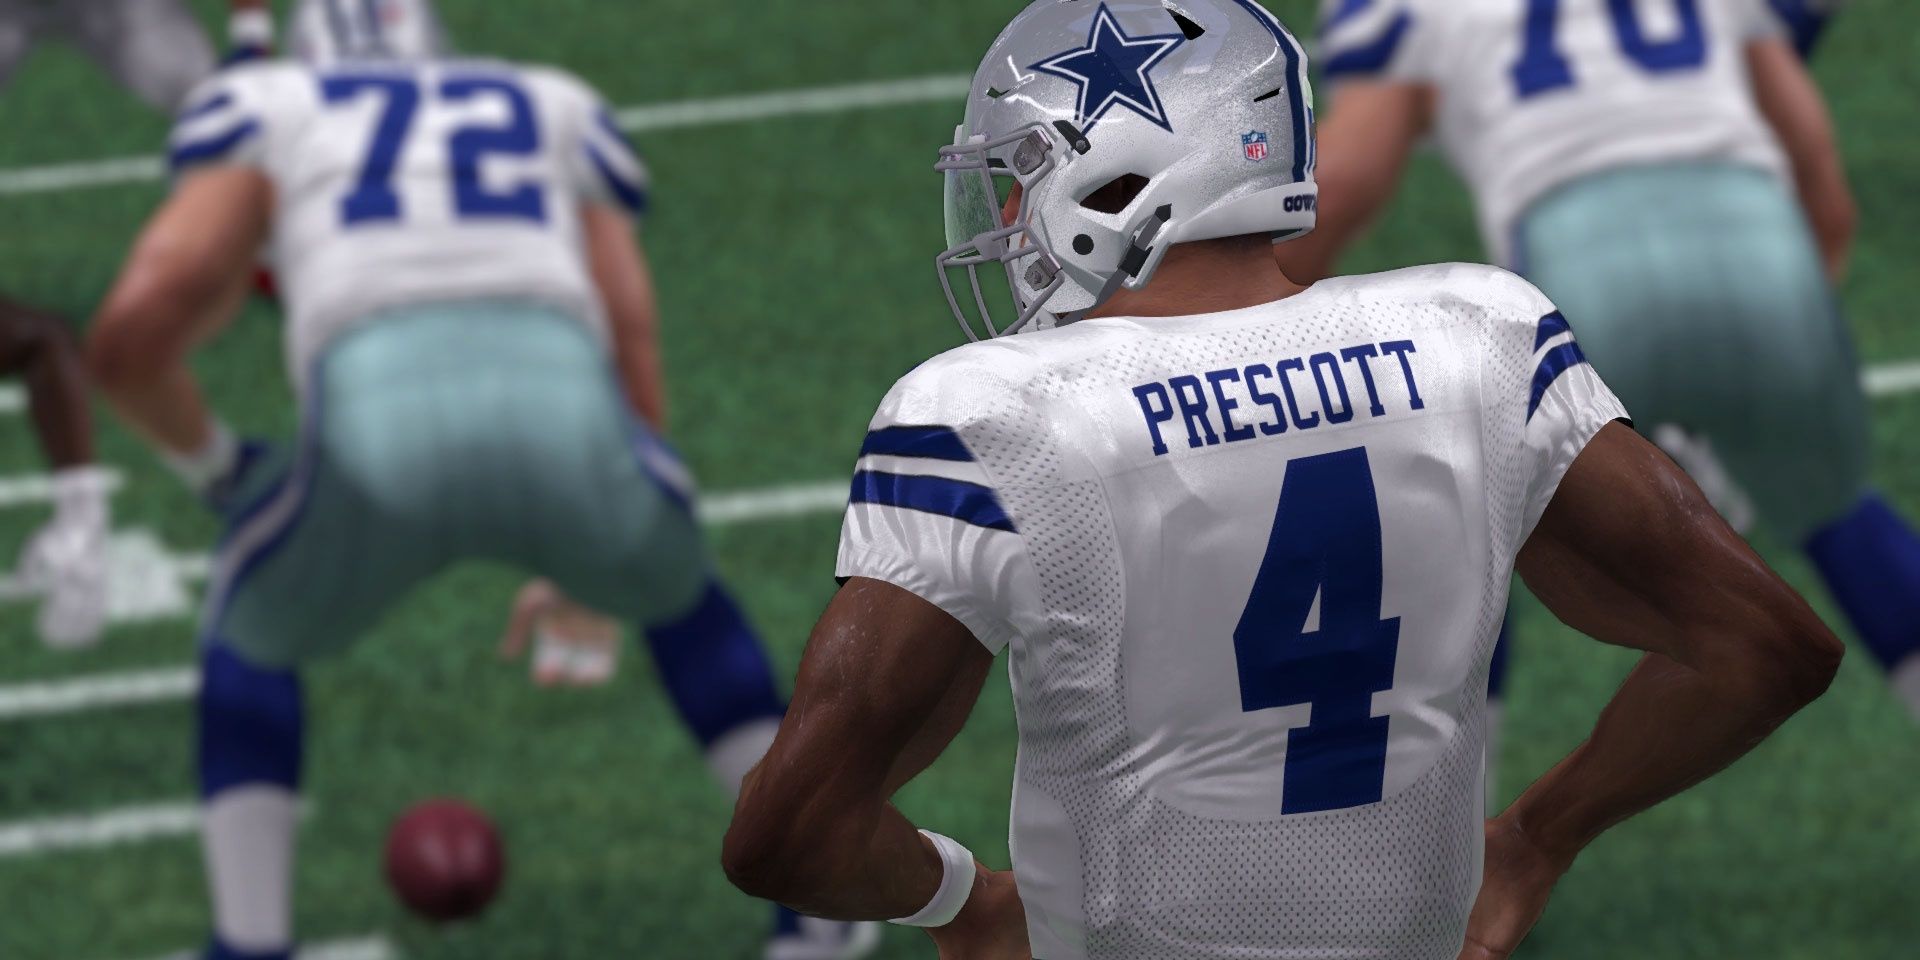 Dak Prescott about to get the ball snapped to him in Madden NFL 21